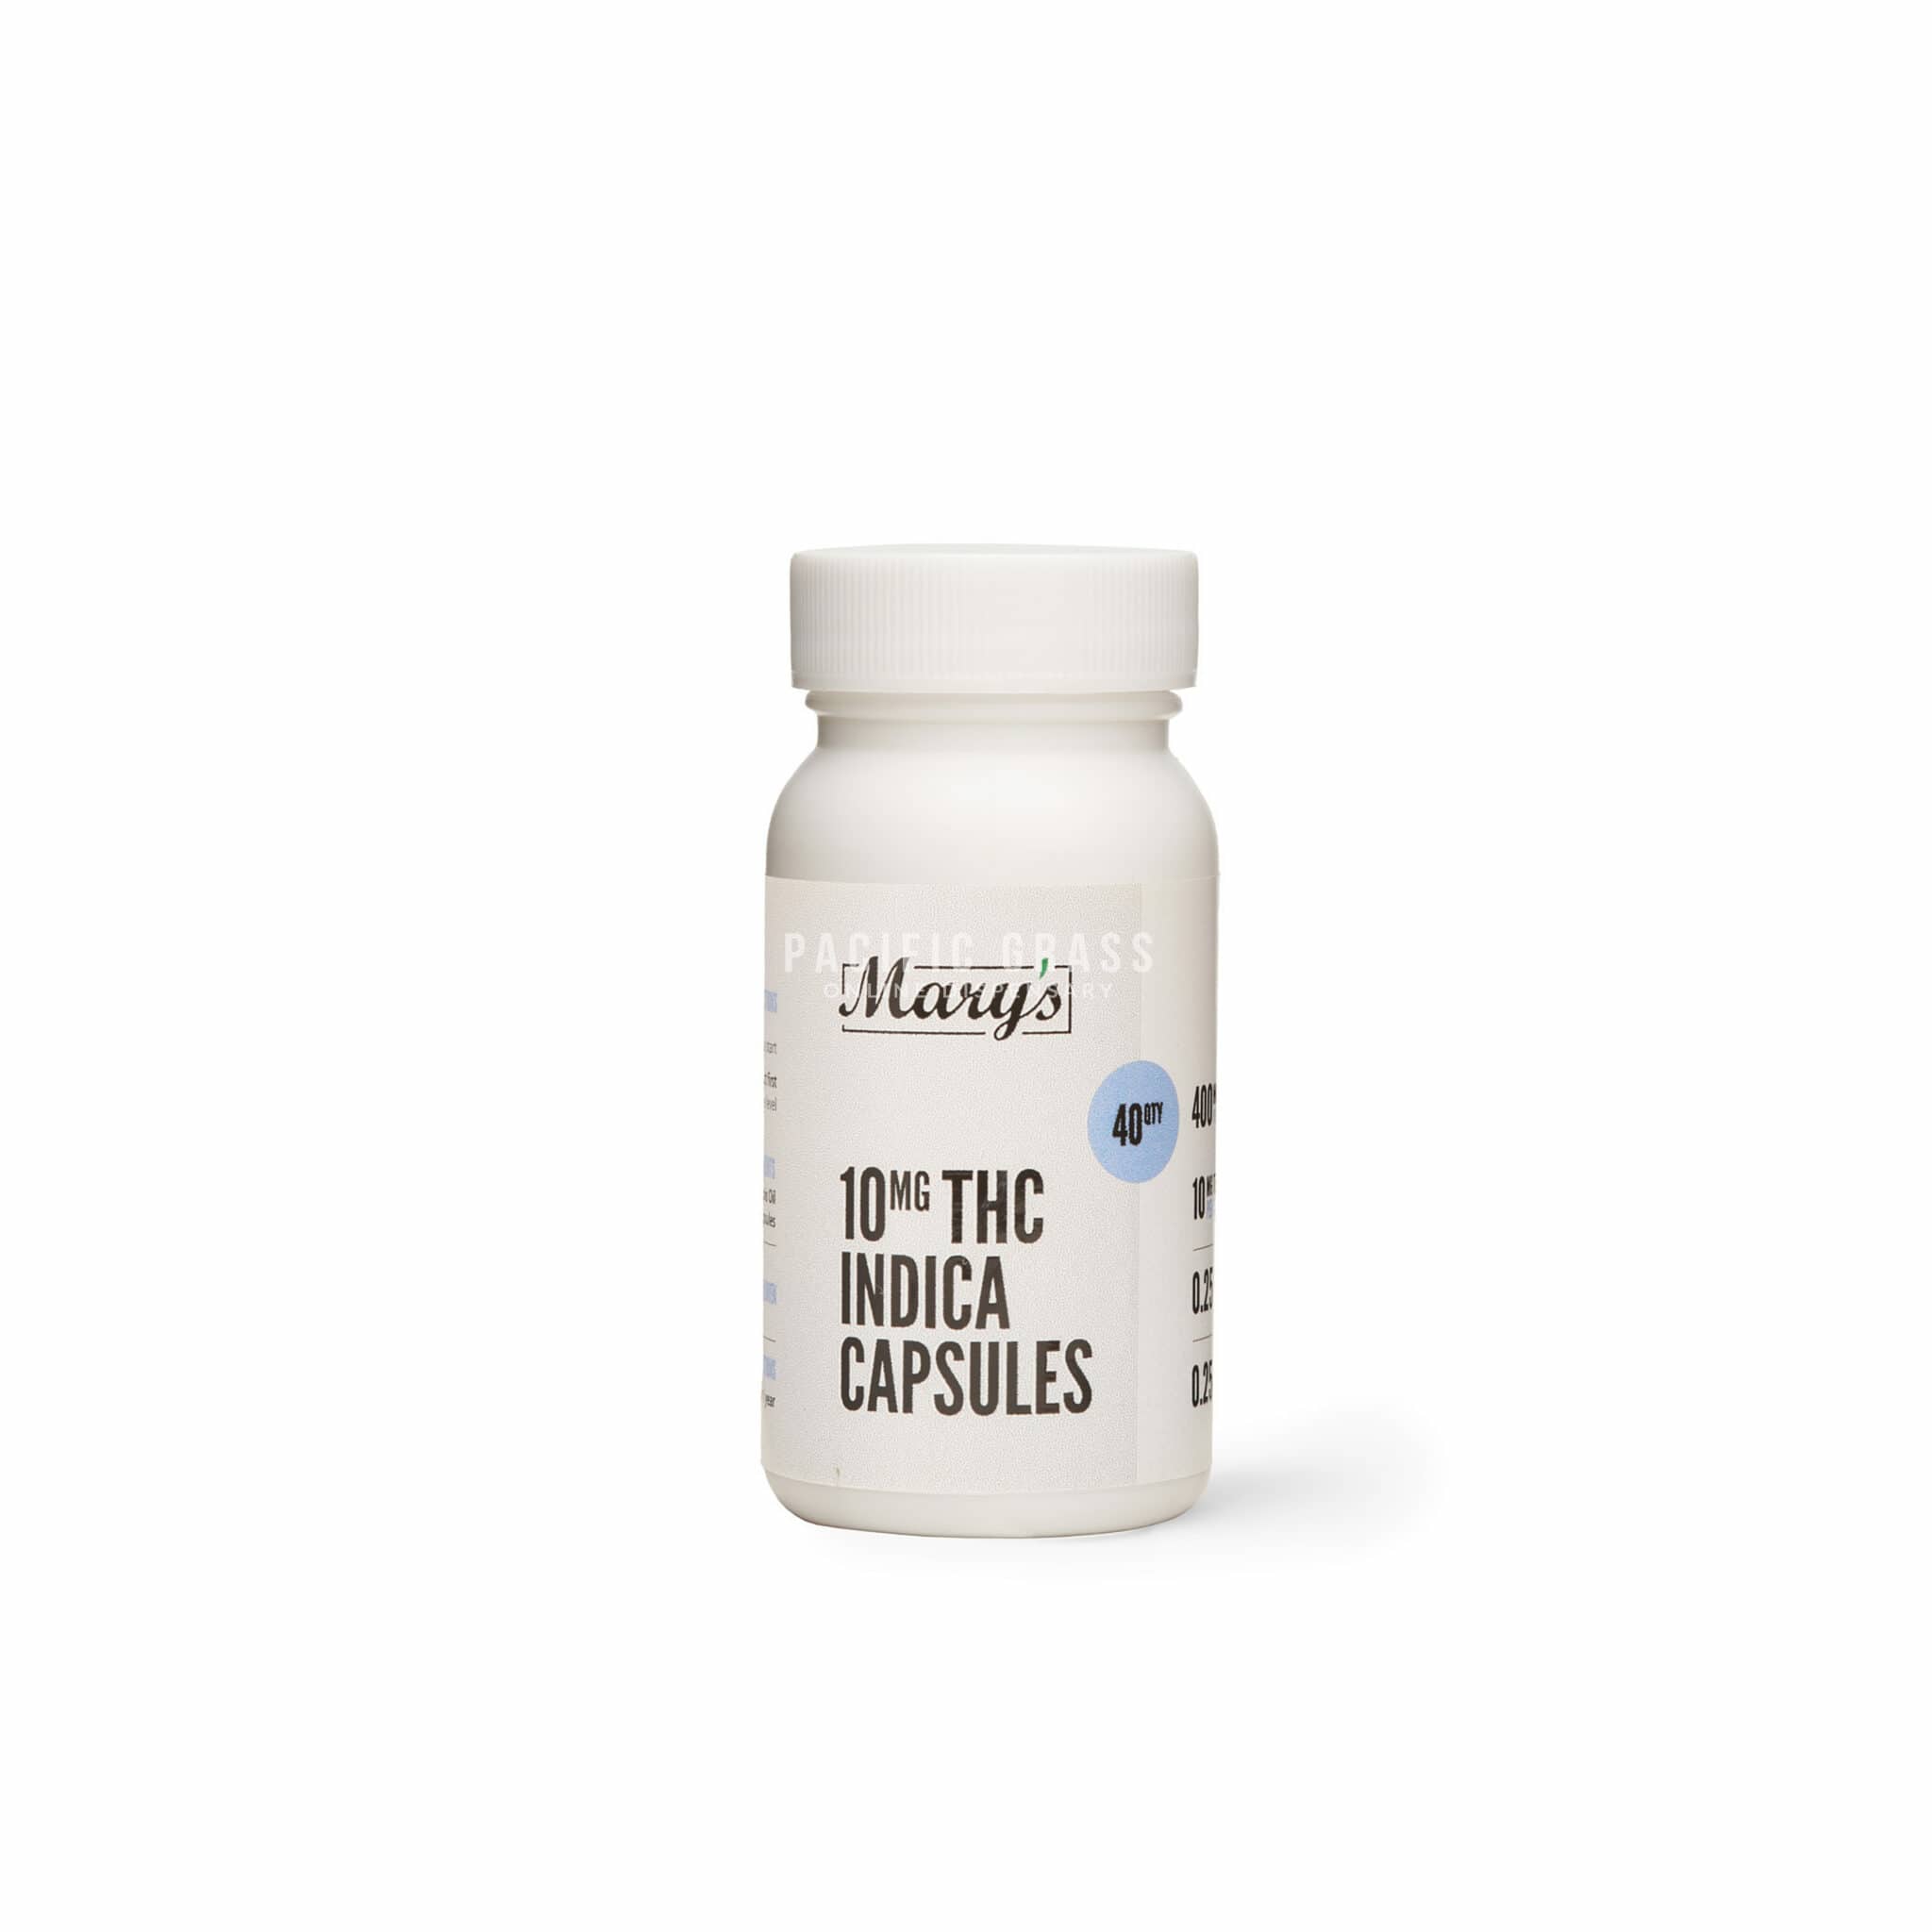 Mary’s thc capsules – indica 40x10mg